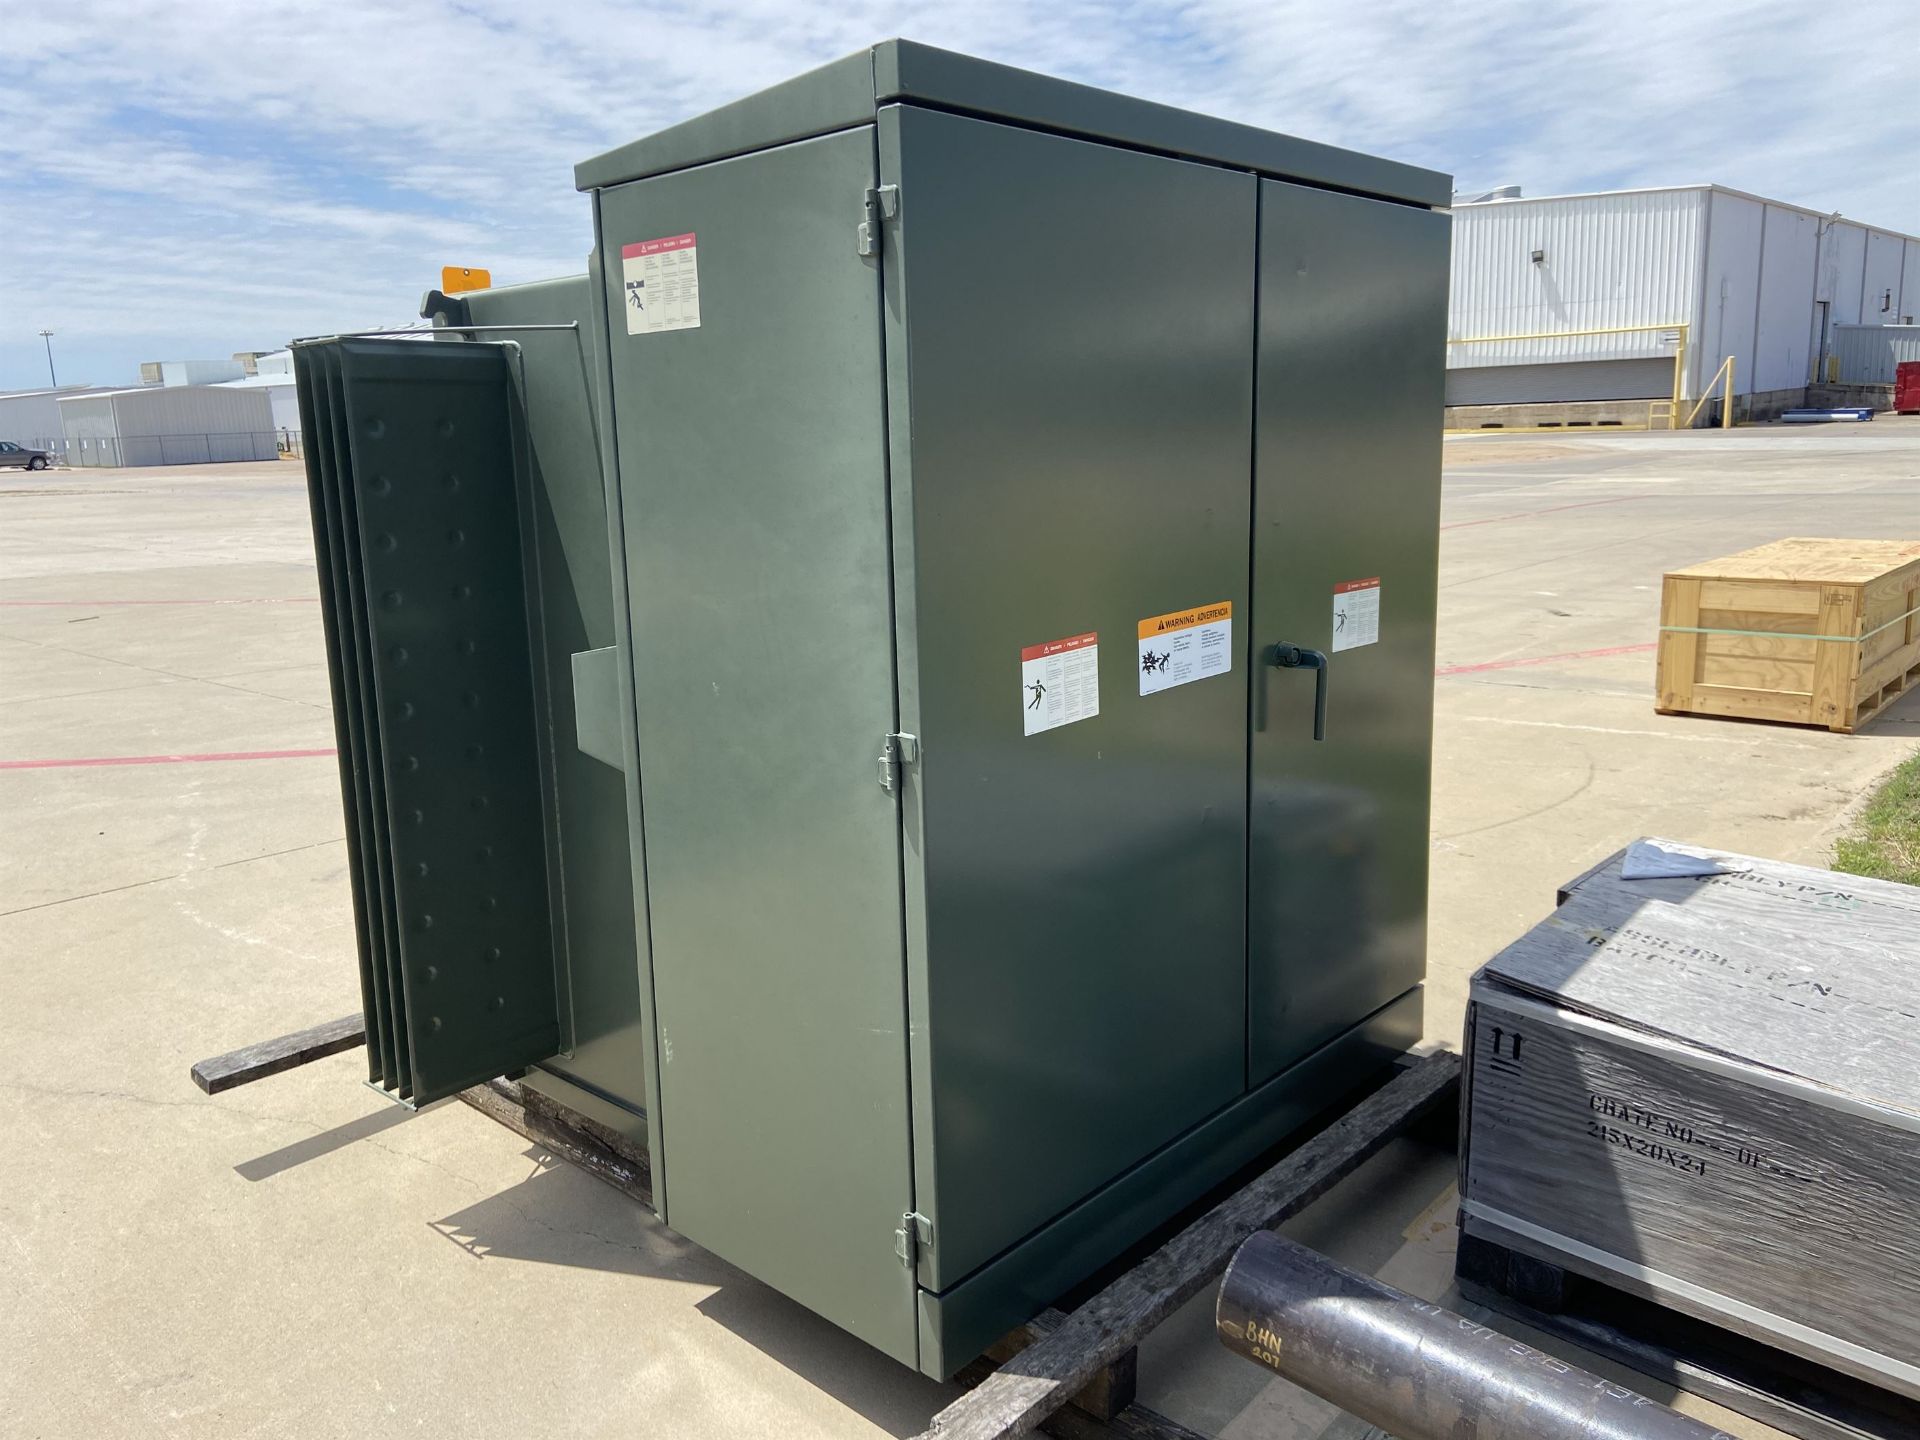 2013 Schneider Electric Square D 1000 KVA Class KNAN 3 Phase Transformer, s/n 31894820-001-01, w/ - Image 2 of 6